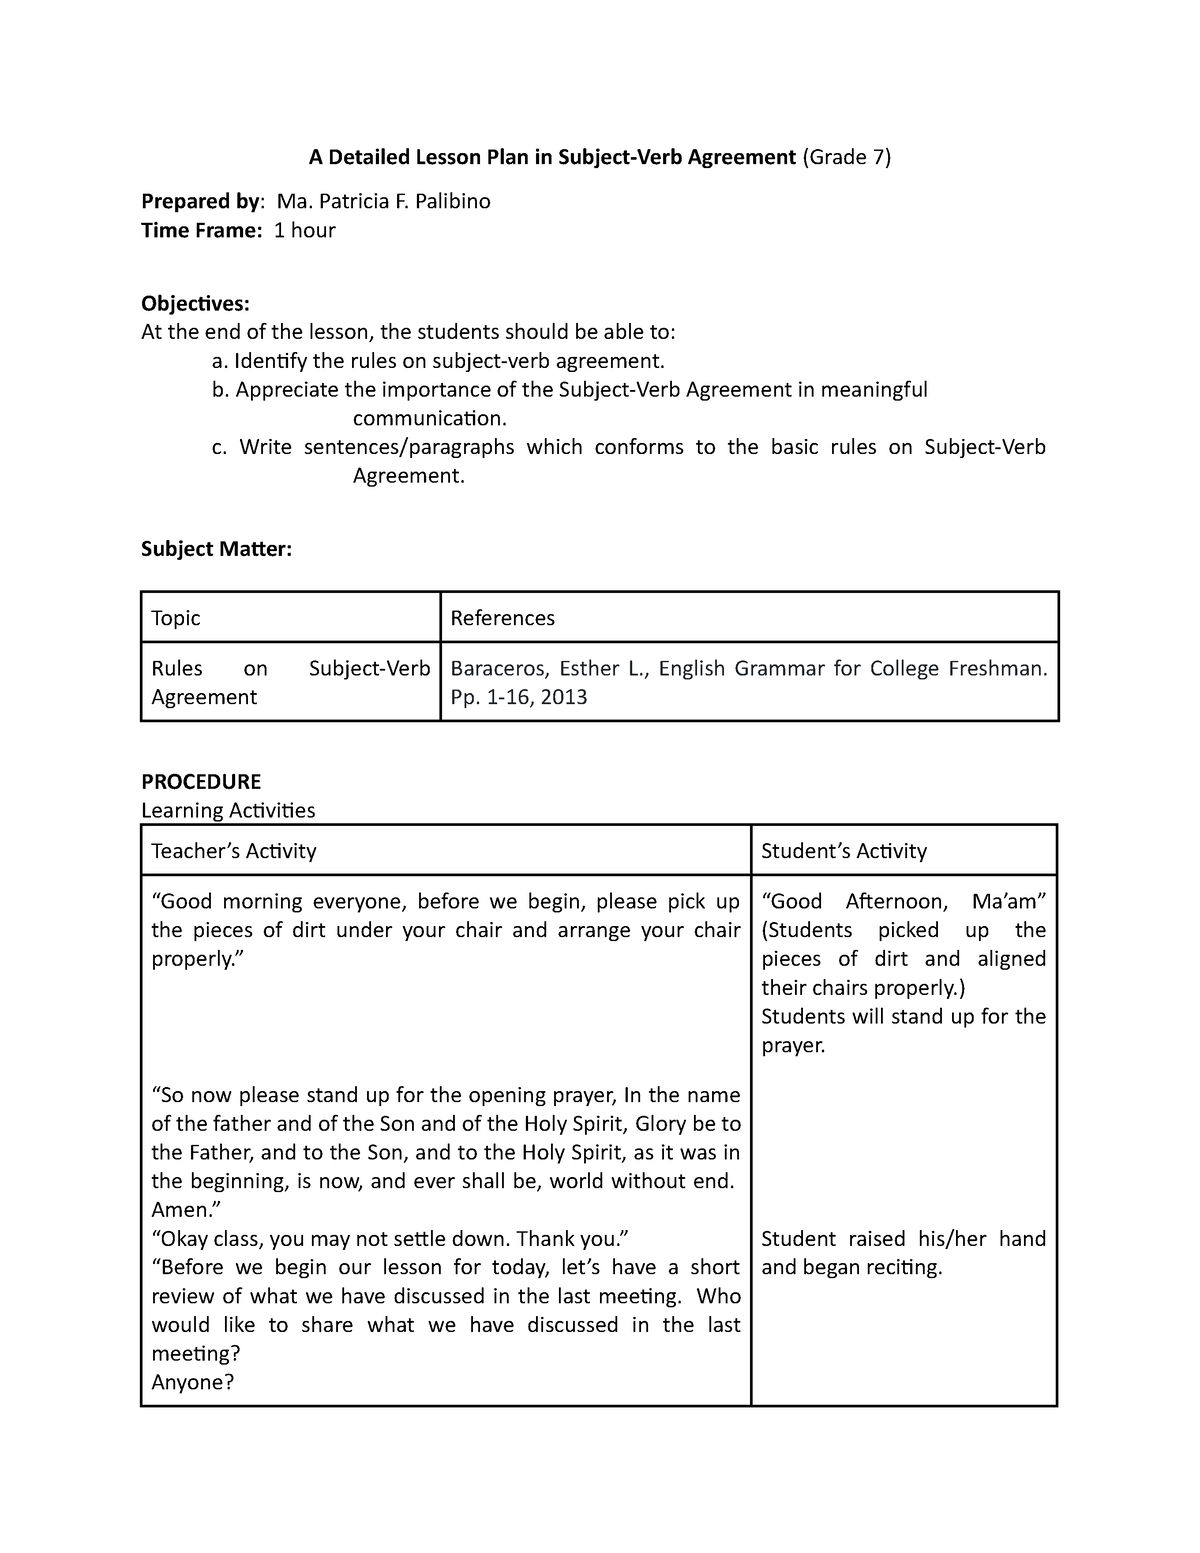 Detailed Lesson Plan For Grade 7 FOR SUBJECT VERB AGREEMENT A 